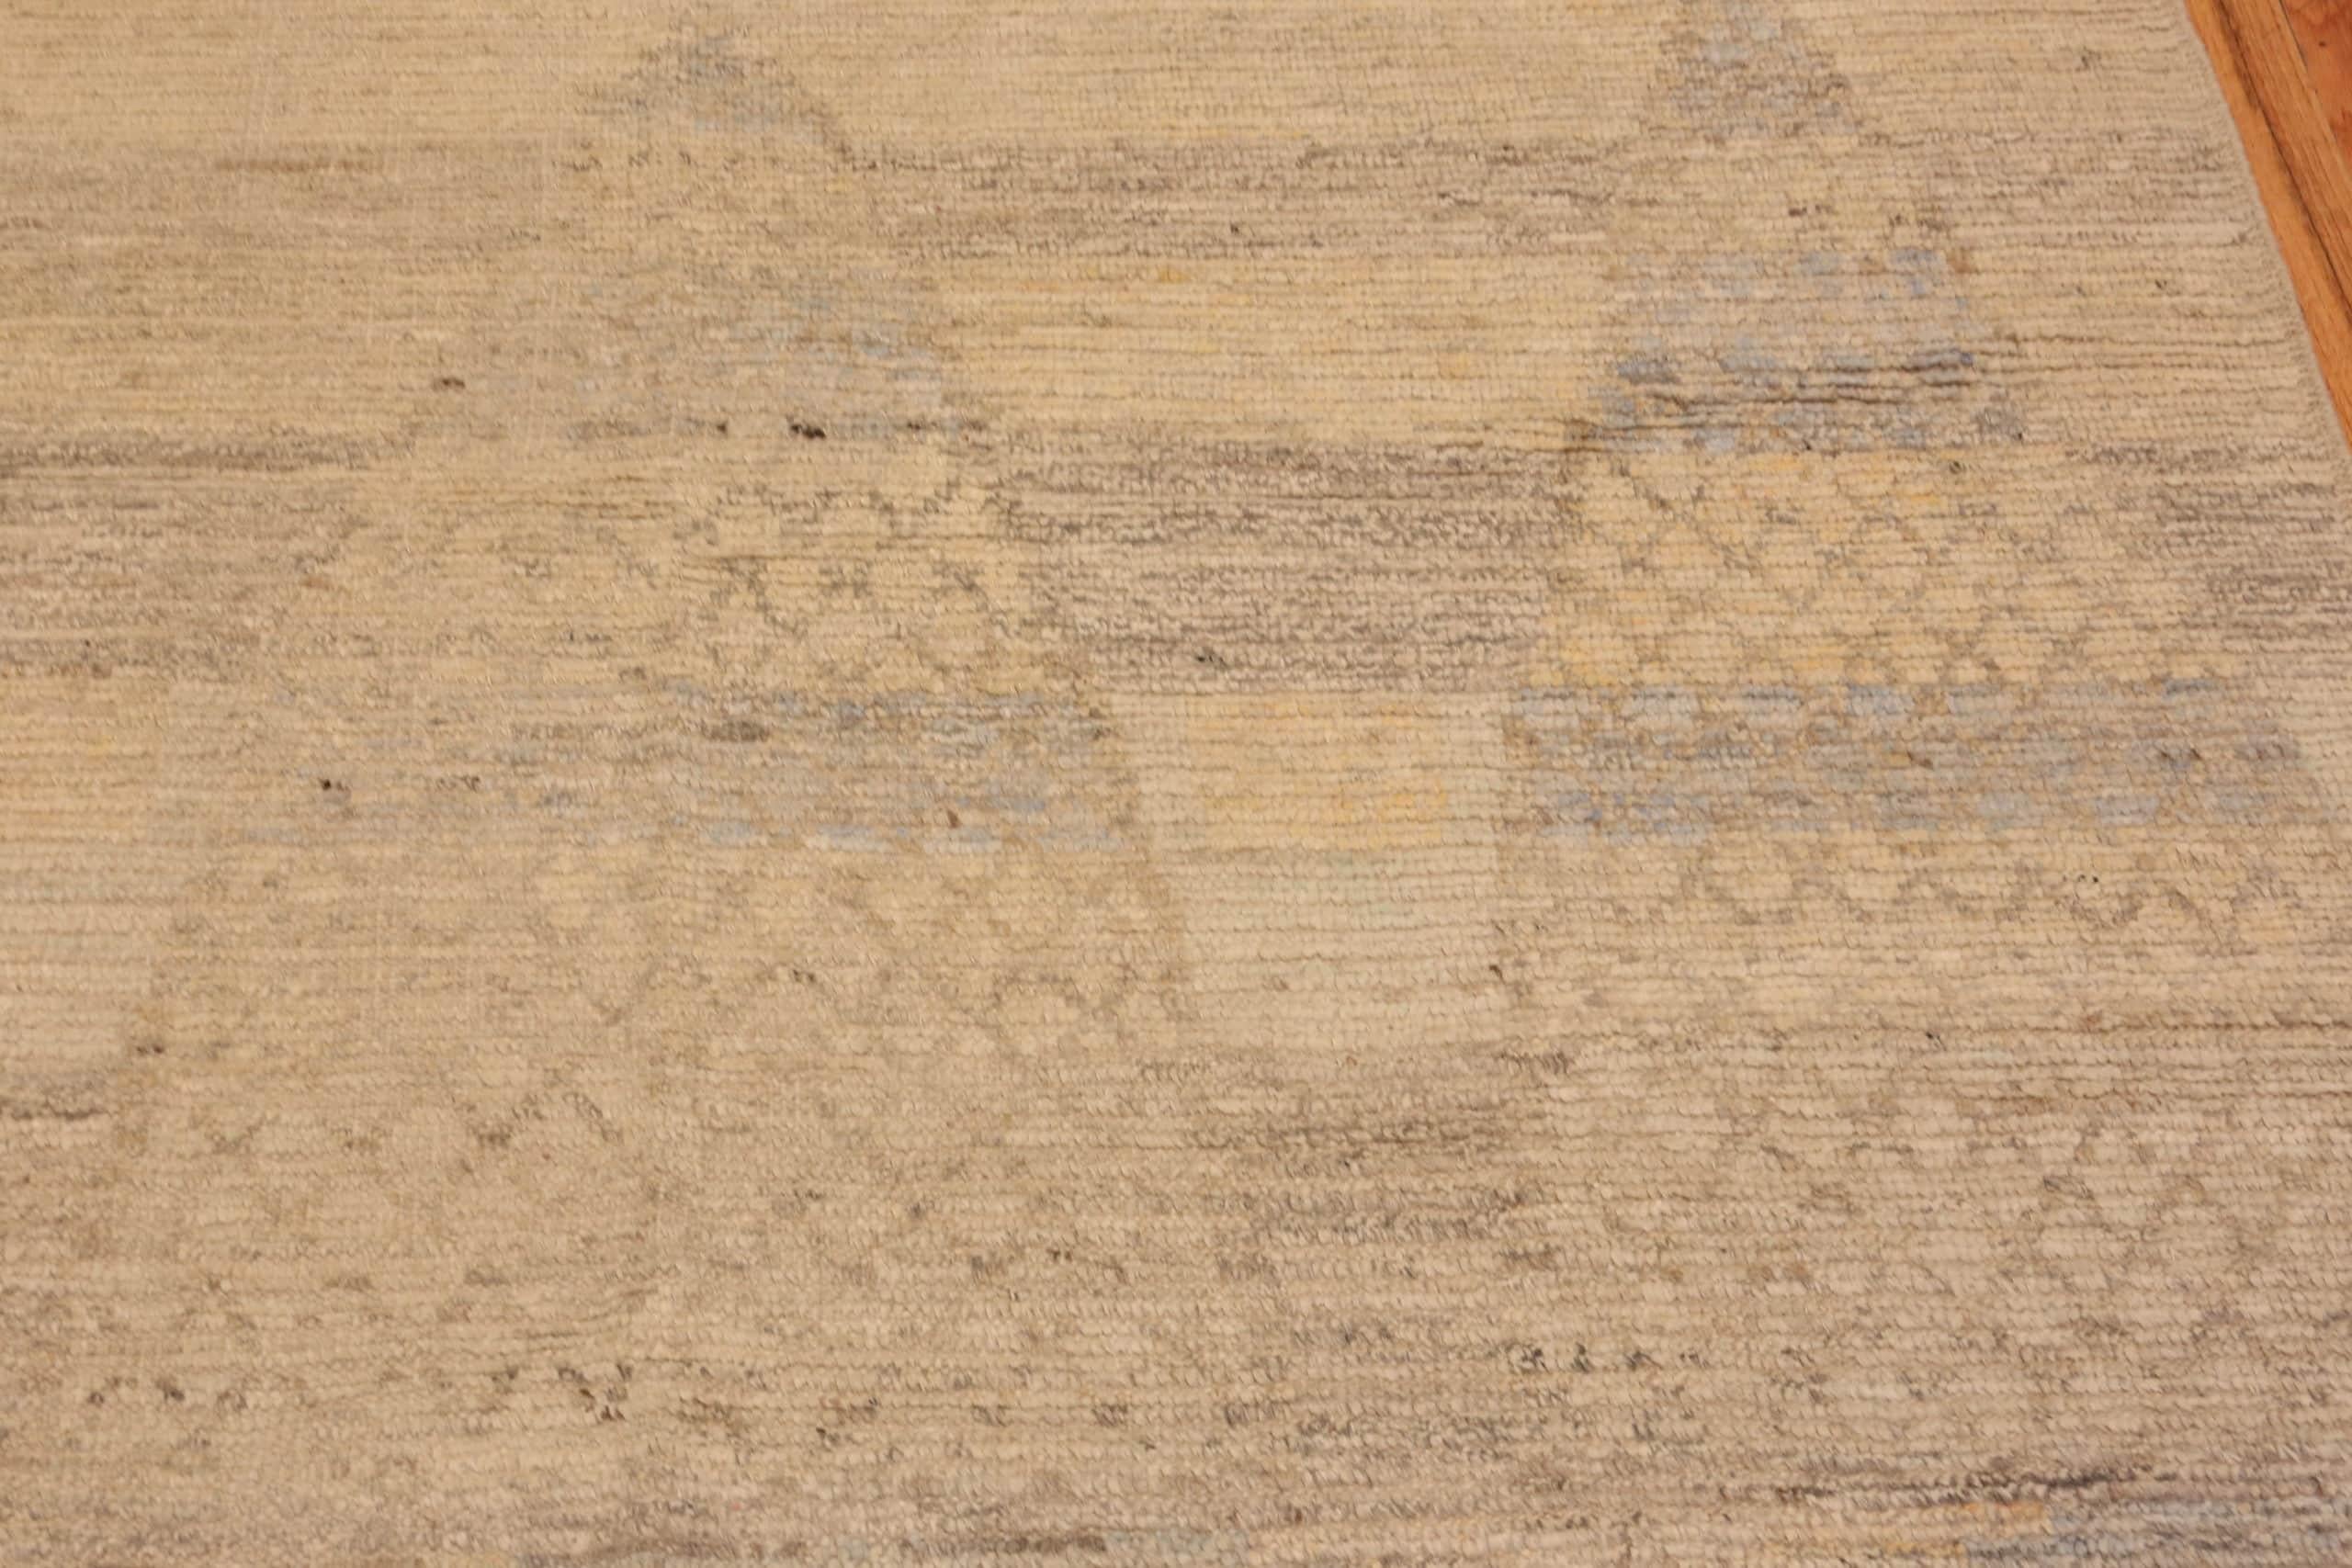 Contemporary Nazmiyal Collection Modern Distressed Decorative Rug. 15 ft 4 in x 20 ft 10 in For Sale